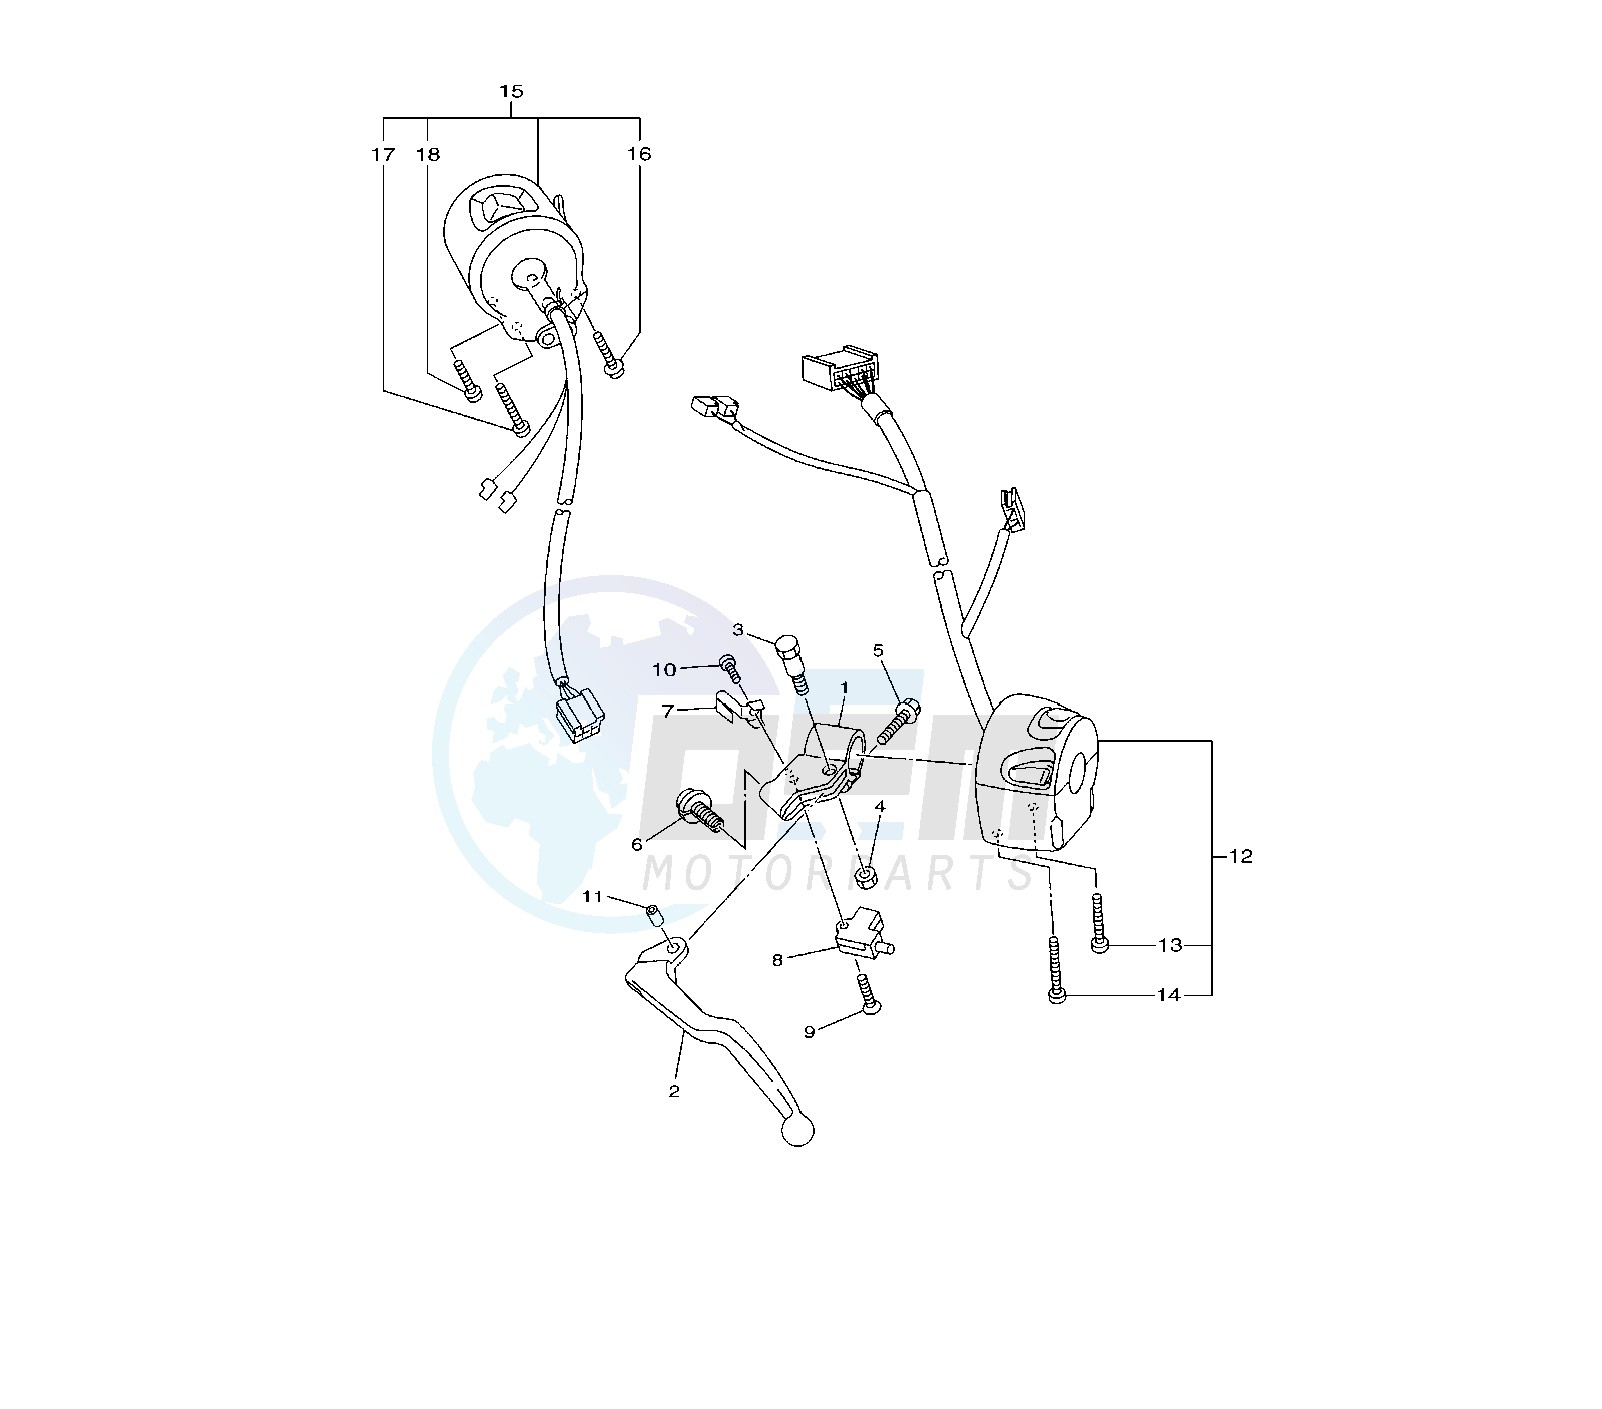 HANDLE SWITCH AND LEVER 5WW8 blueprint